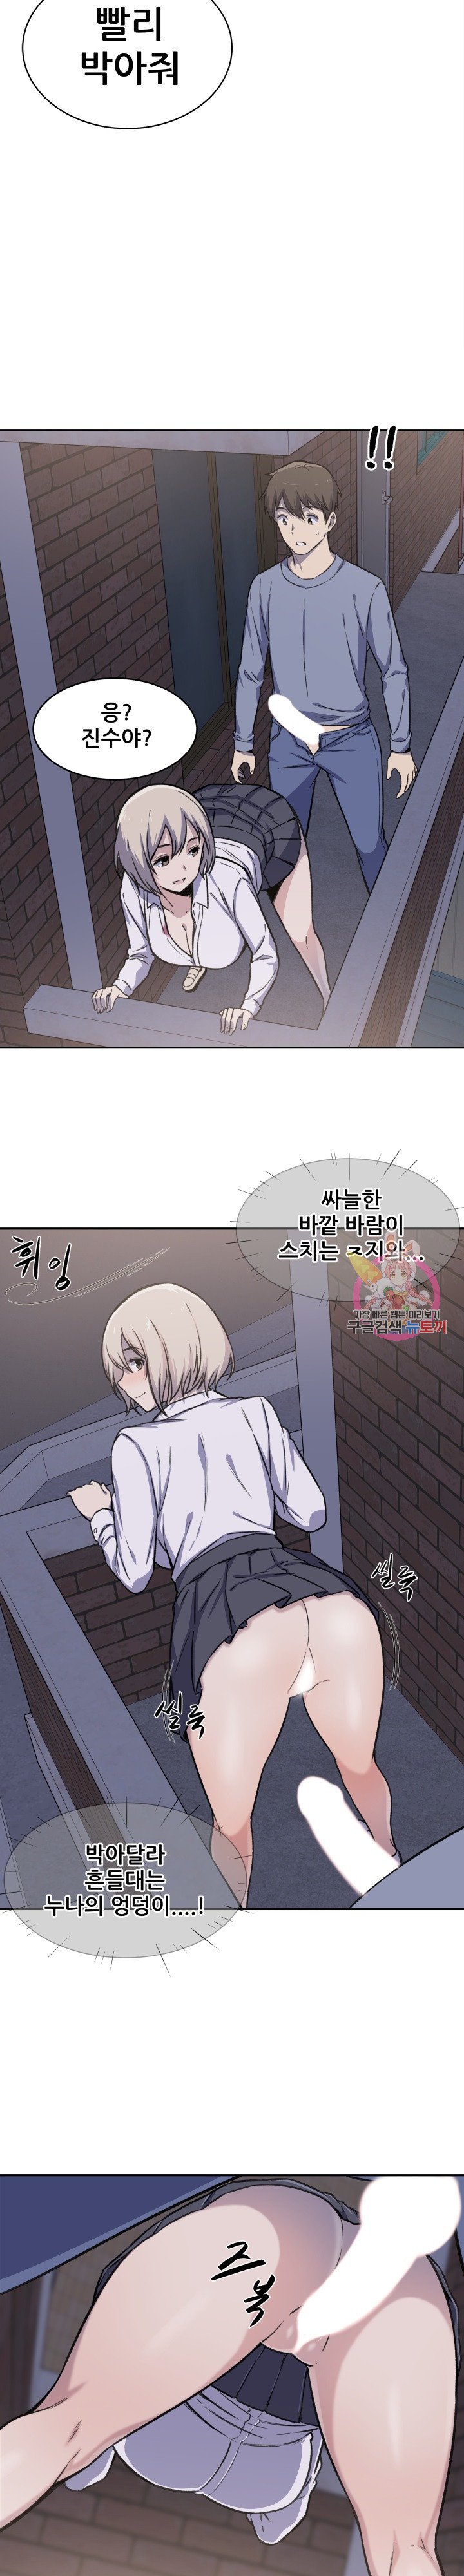 the-ark-is-me-raw-chap-30-18